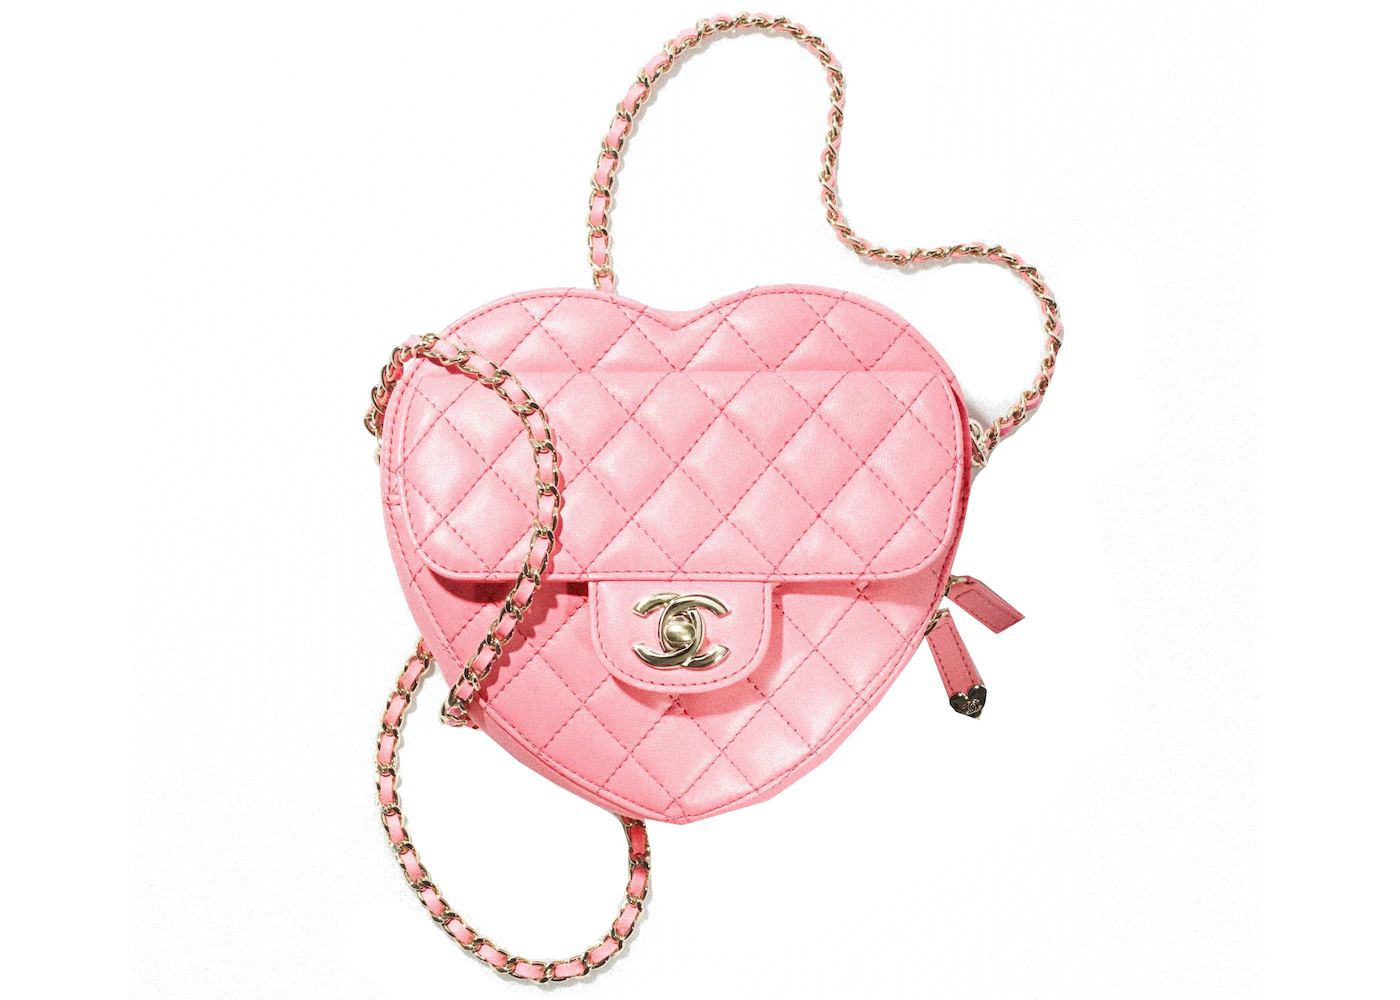 Chanel Heart Bag Price Guide